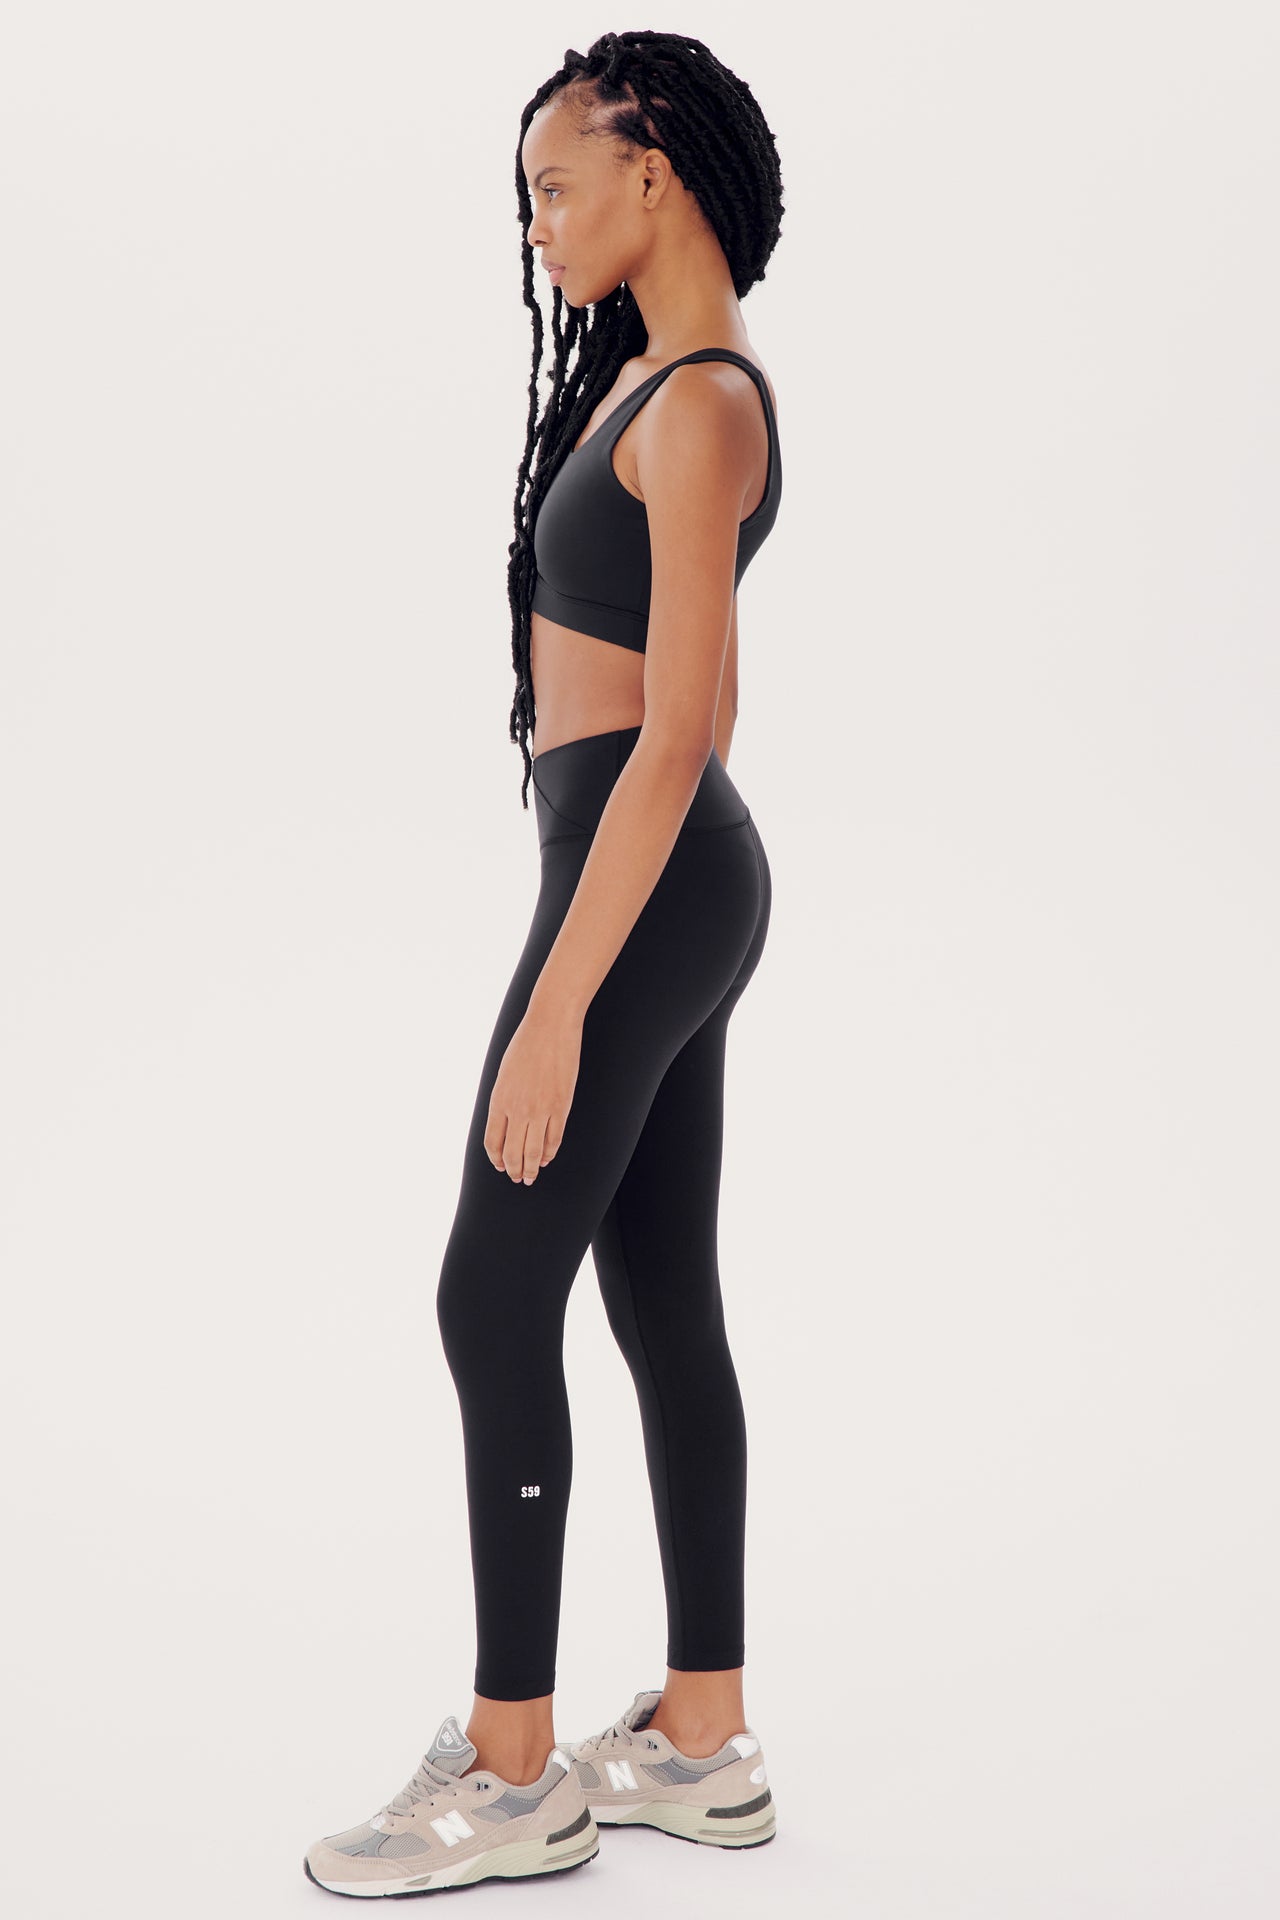 A woman wearing the SPLITS59 Sprint Rigor Bra in black and leggings stands in profile against a white background, showcasing athletic footwear designed for multi-sport performance.